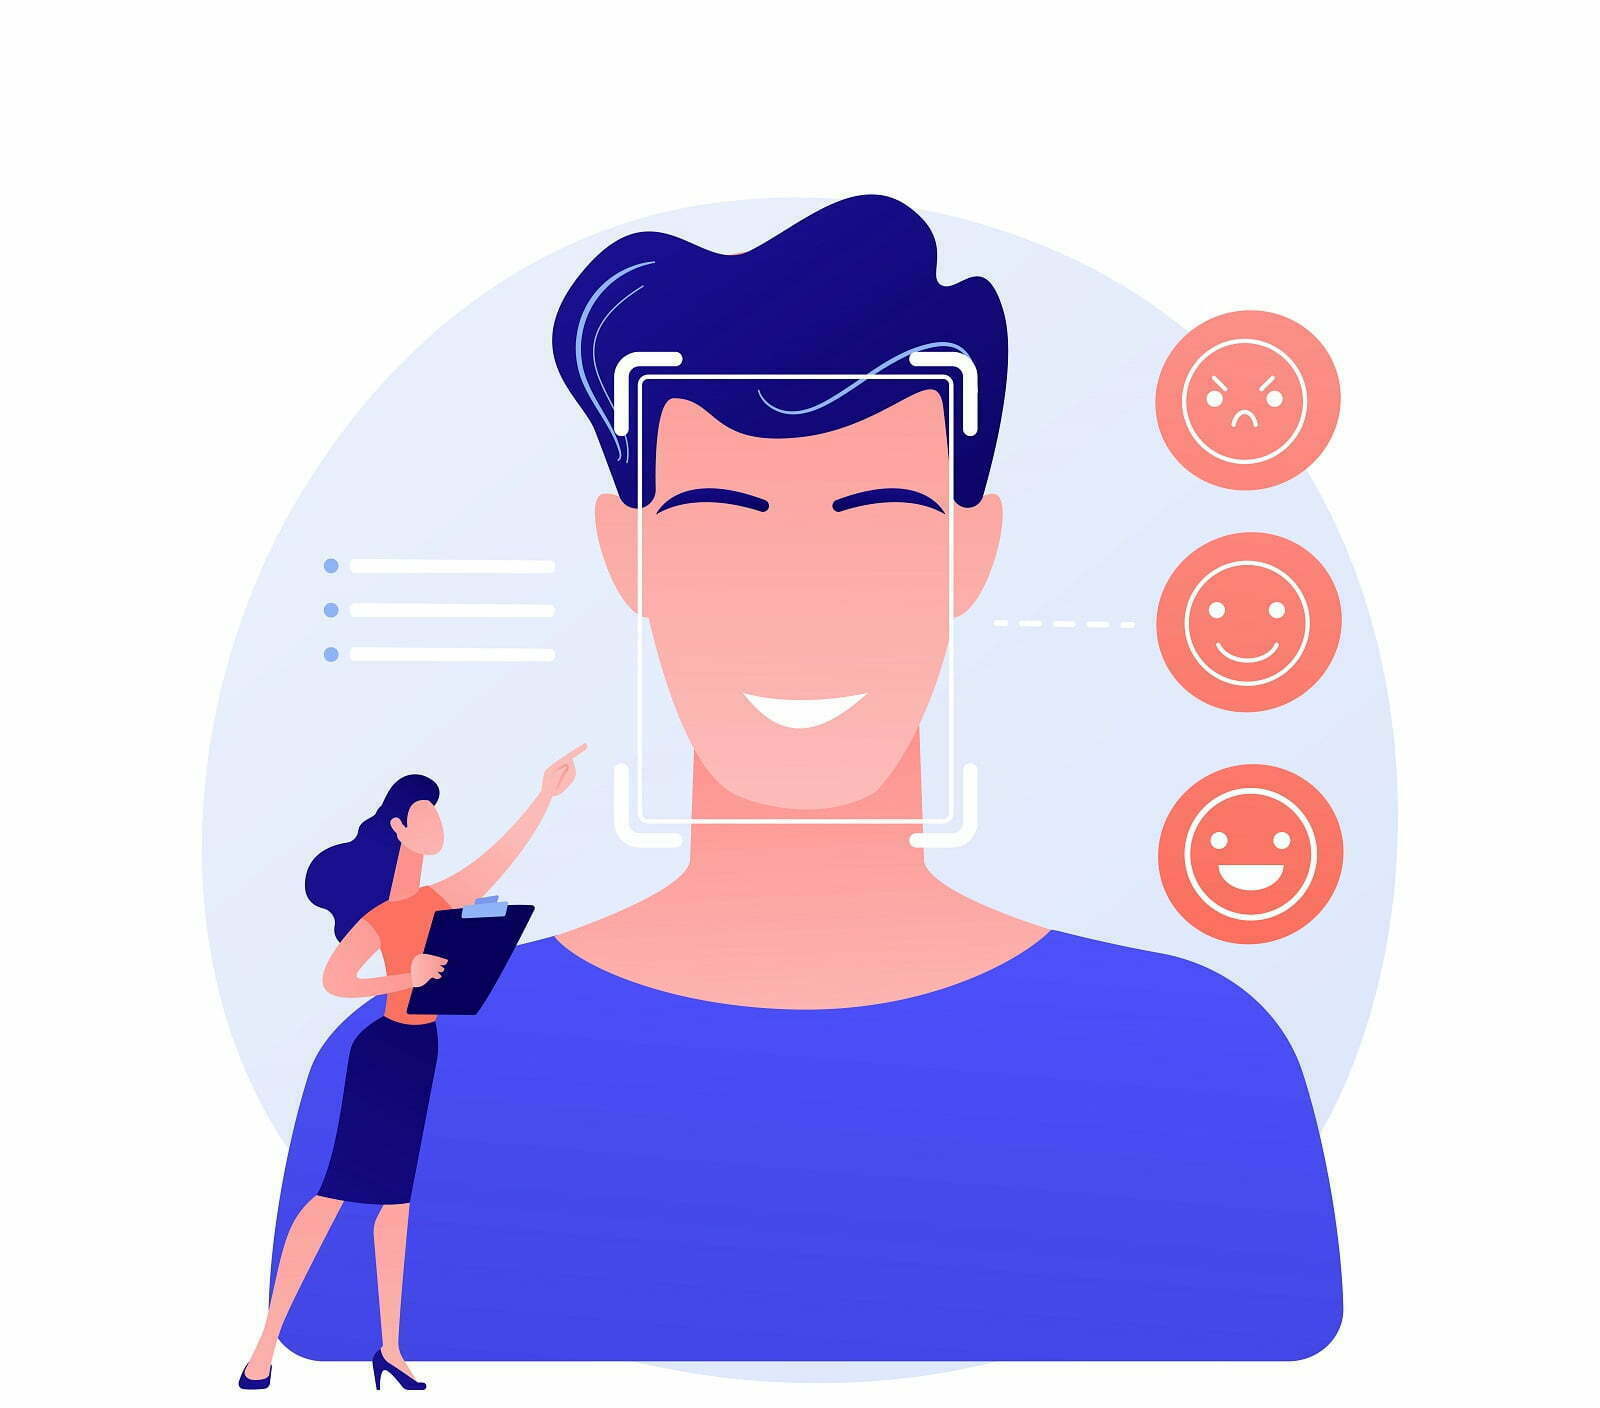 Emotion detection abstract concept vector illustration. Speech, emotional state recognition, emotion detection from text, sensor technology, machine learning, AI reading face abstract metaphor.